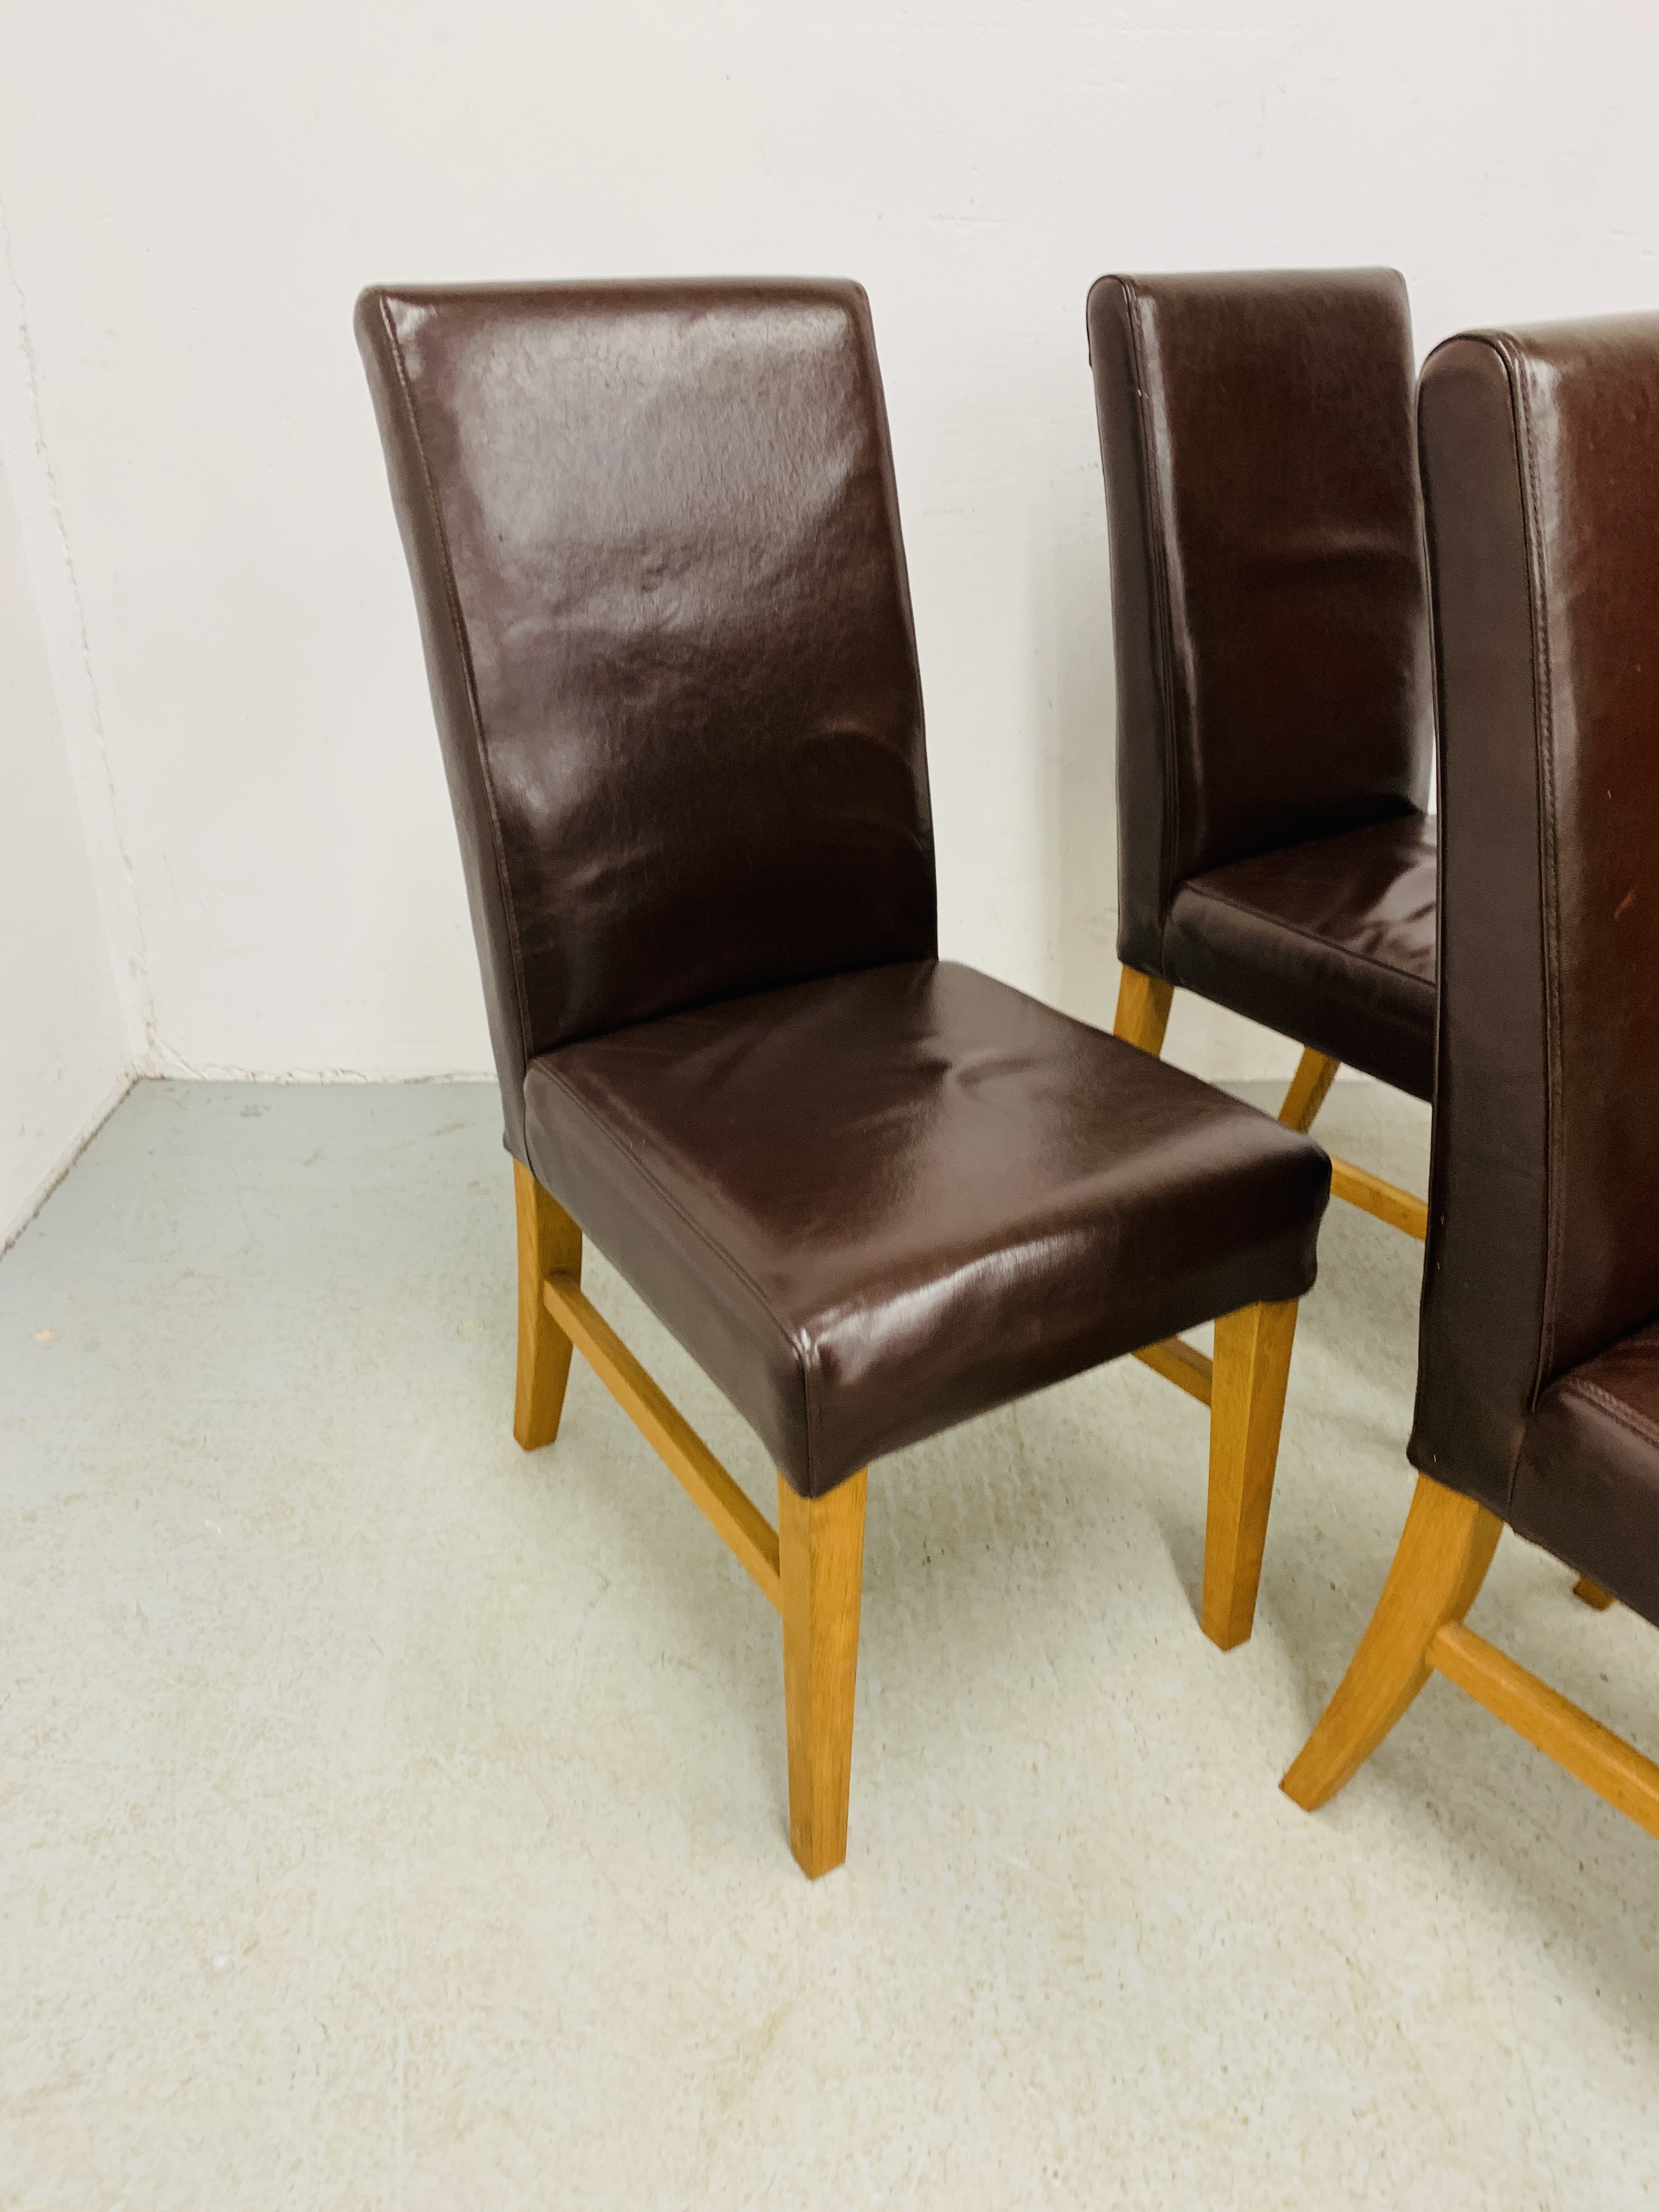 SET OF 4 BROWN FAUX LEATHER DINING CHAIRS - Image 2 of 7